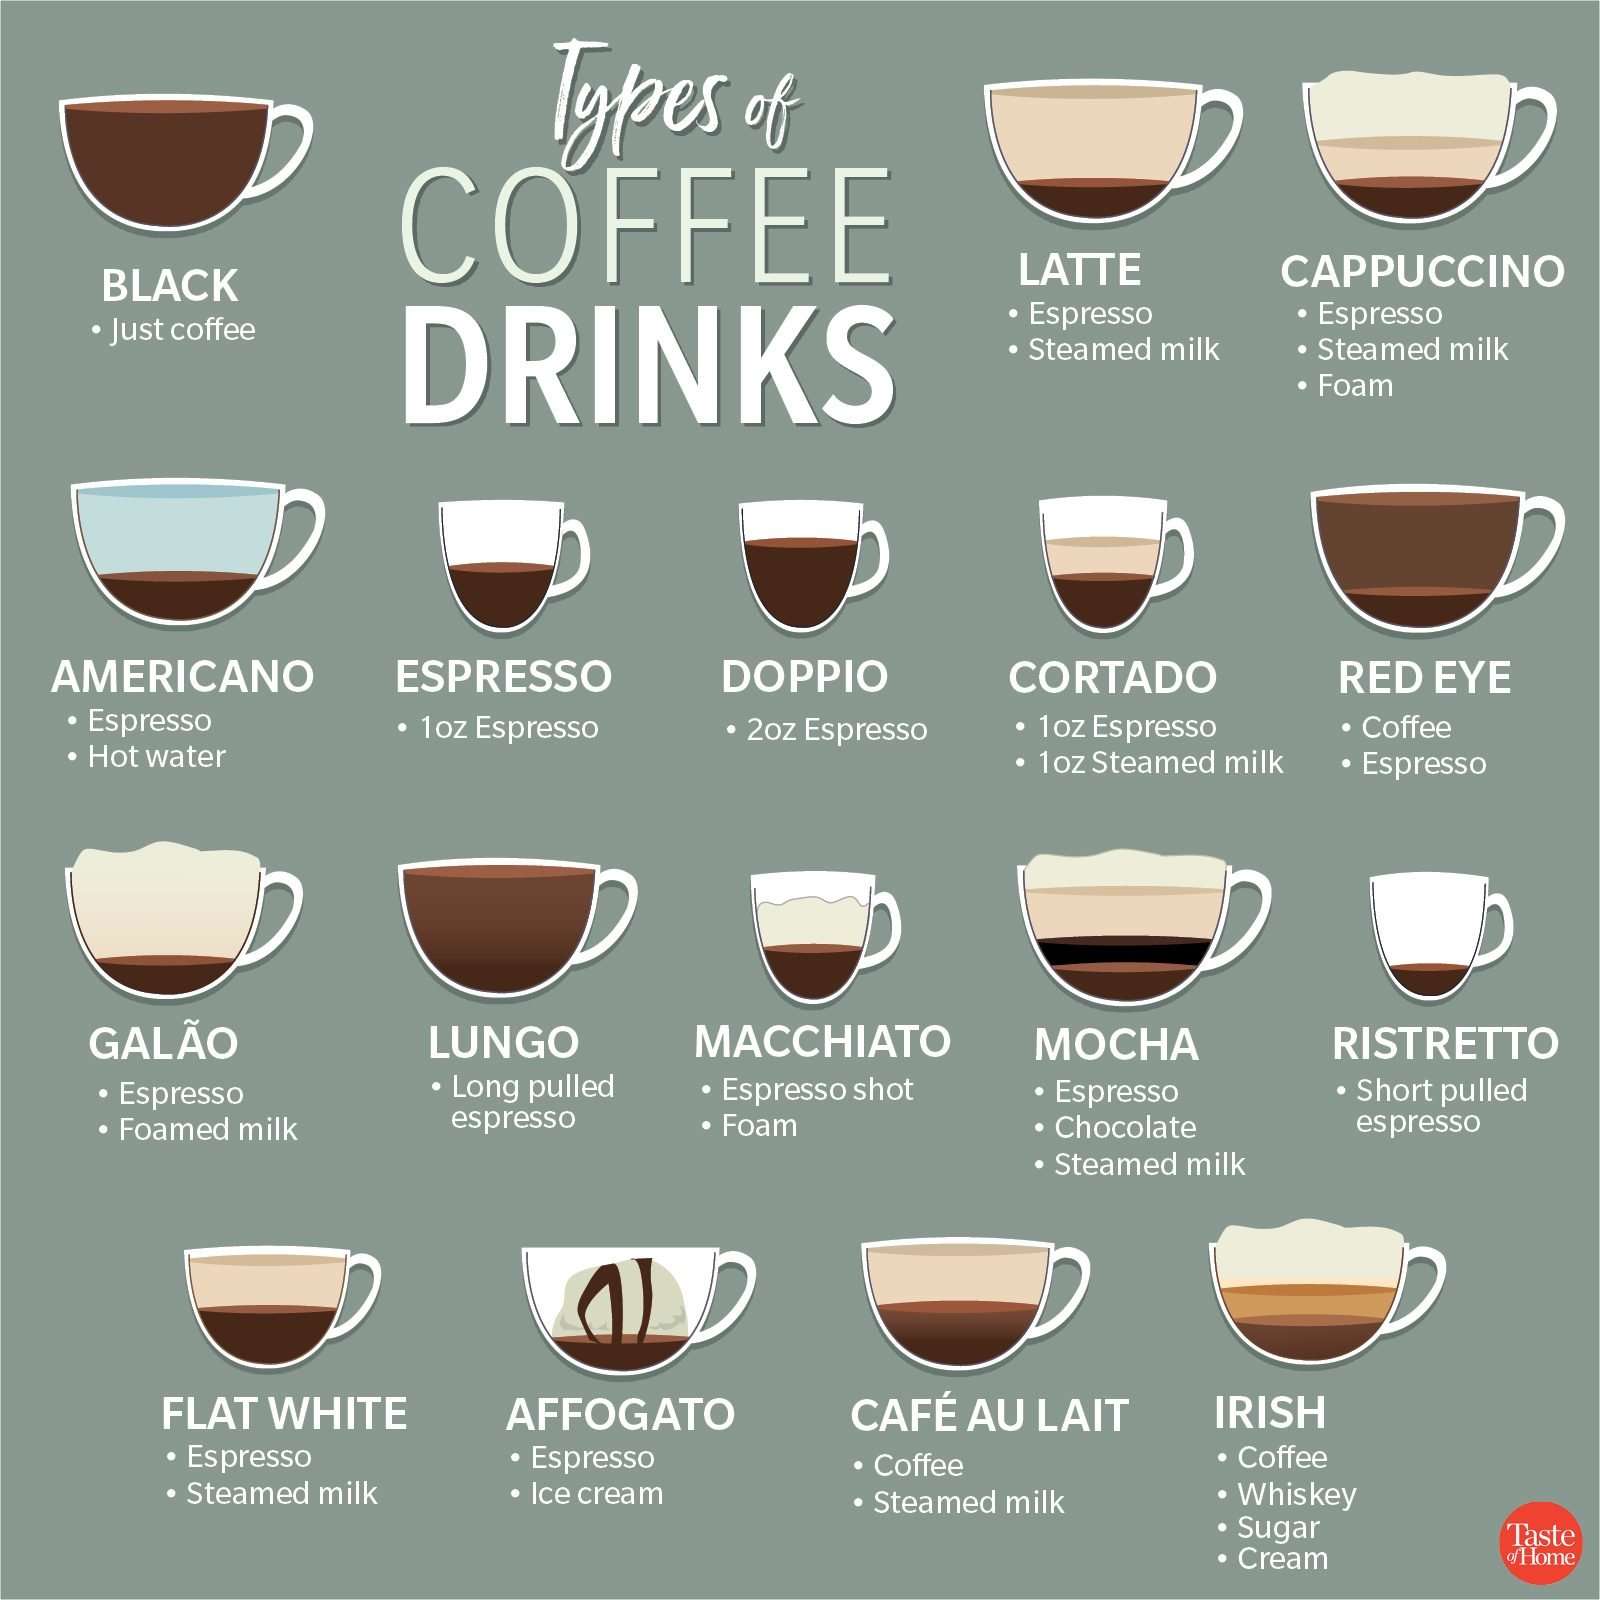 Your Ultimate Guide to Different Types of Coffee and Coffee Makers